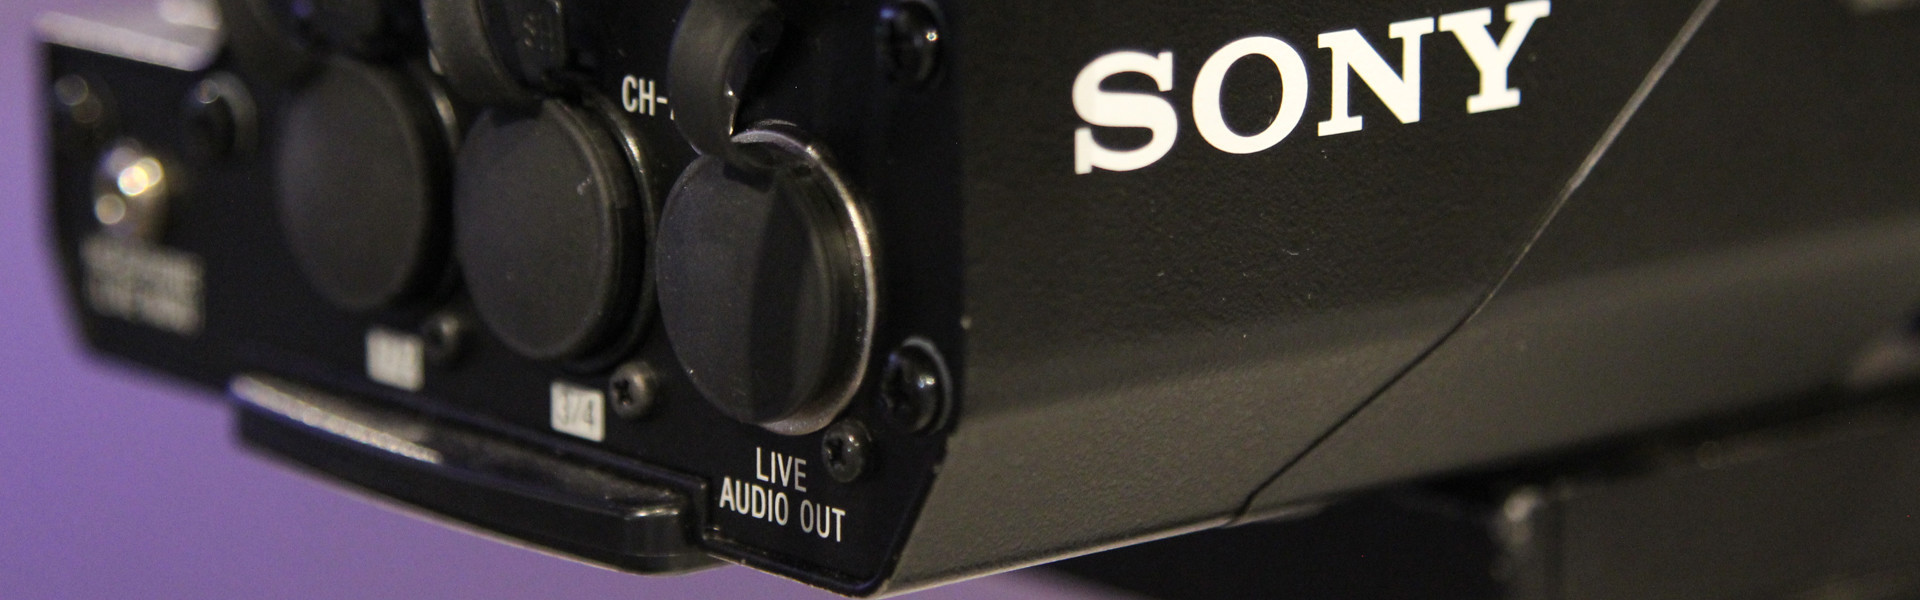 Header image for article Hands On: Sony F65 Camera Overview